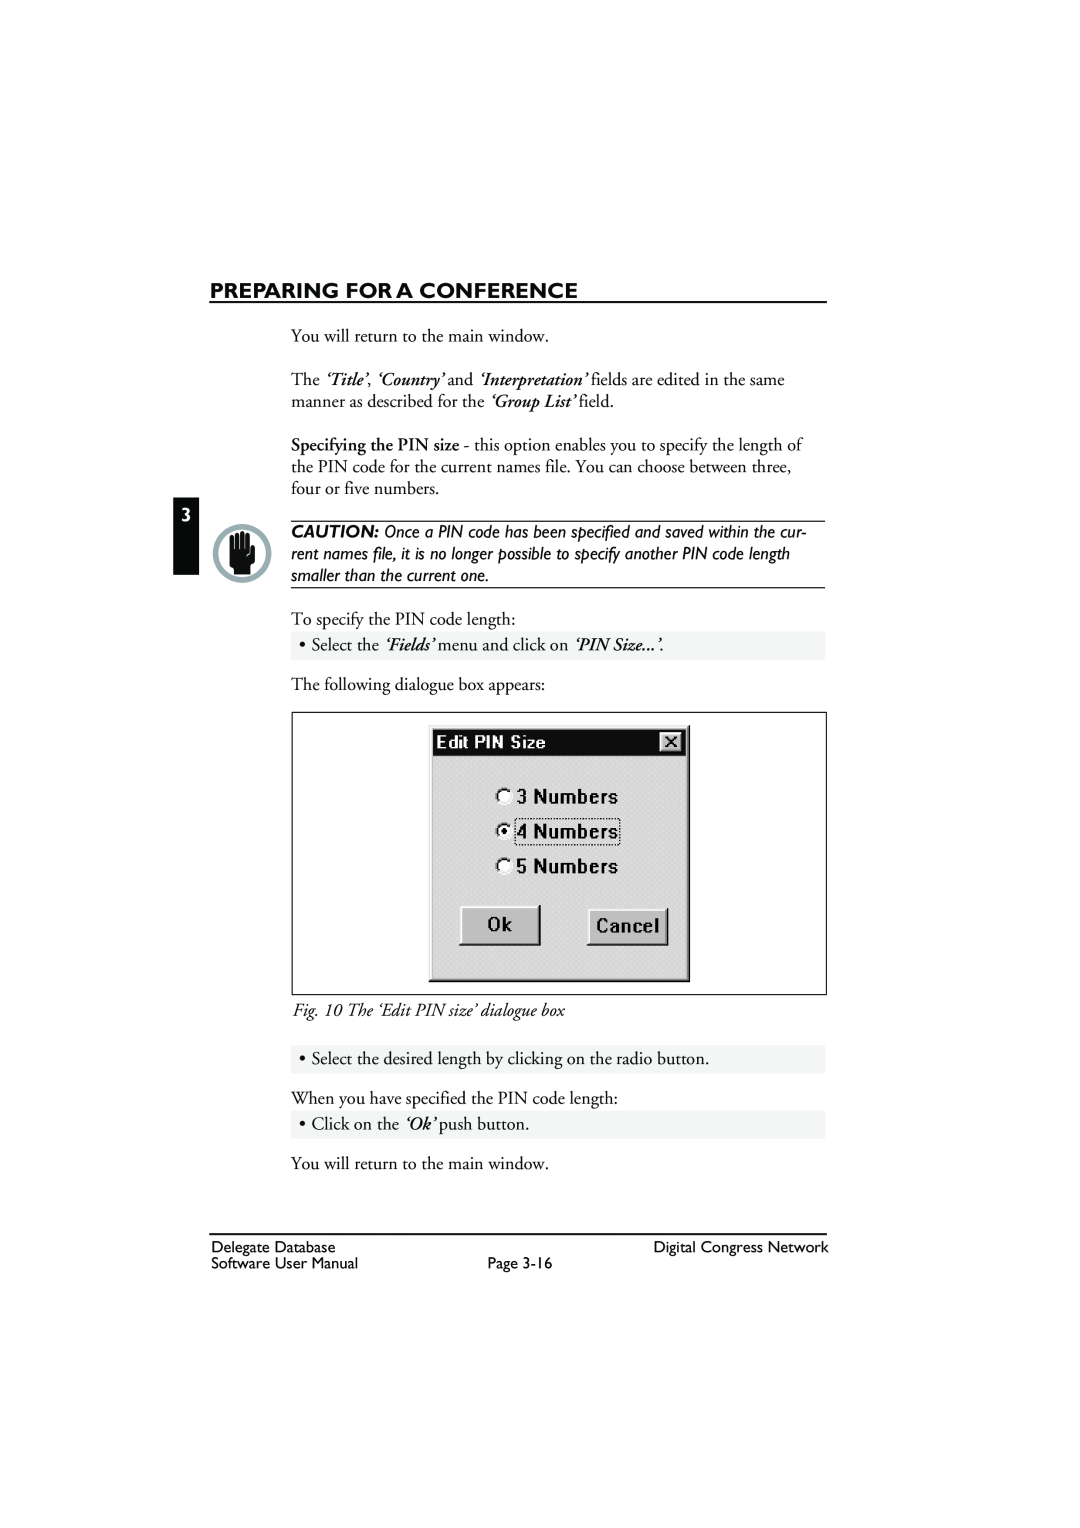 Bosch Appliances LBB3580 The ‘Edit PIN size’ dialogue box, Preparing For A Conference, You will return to the main window 